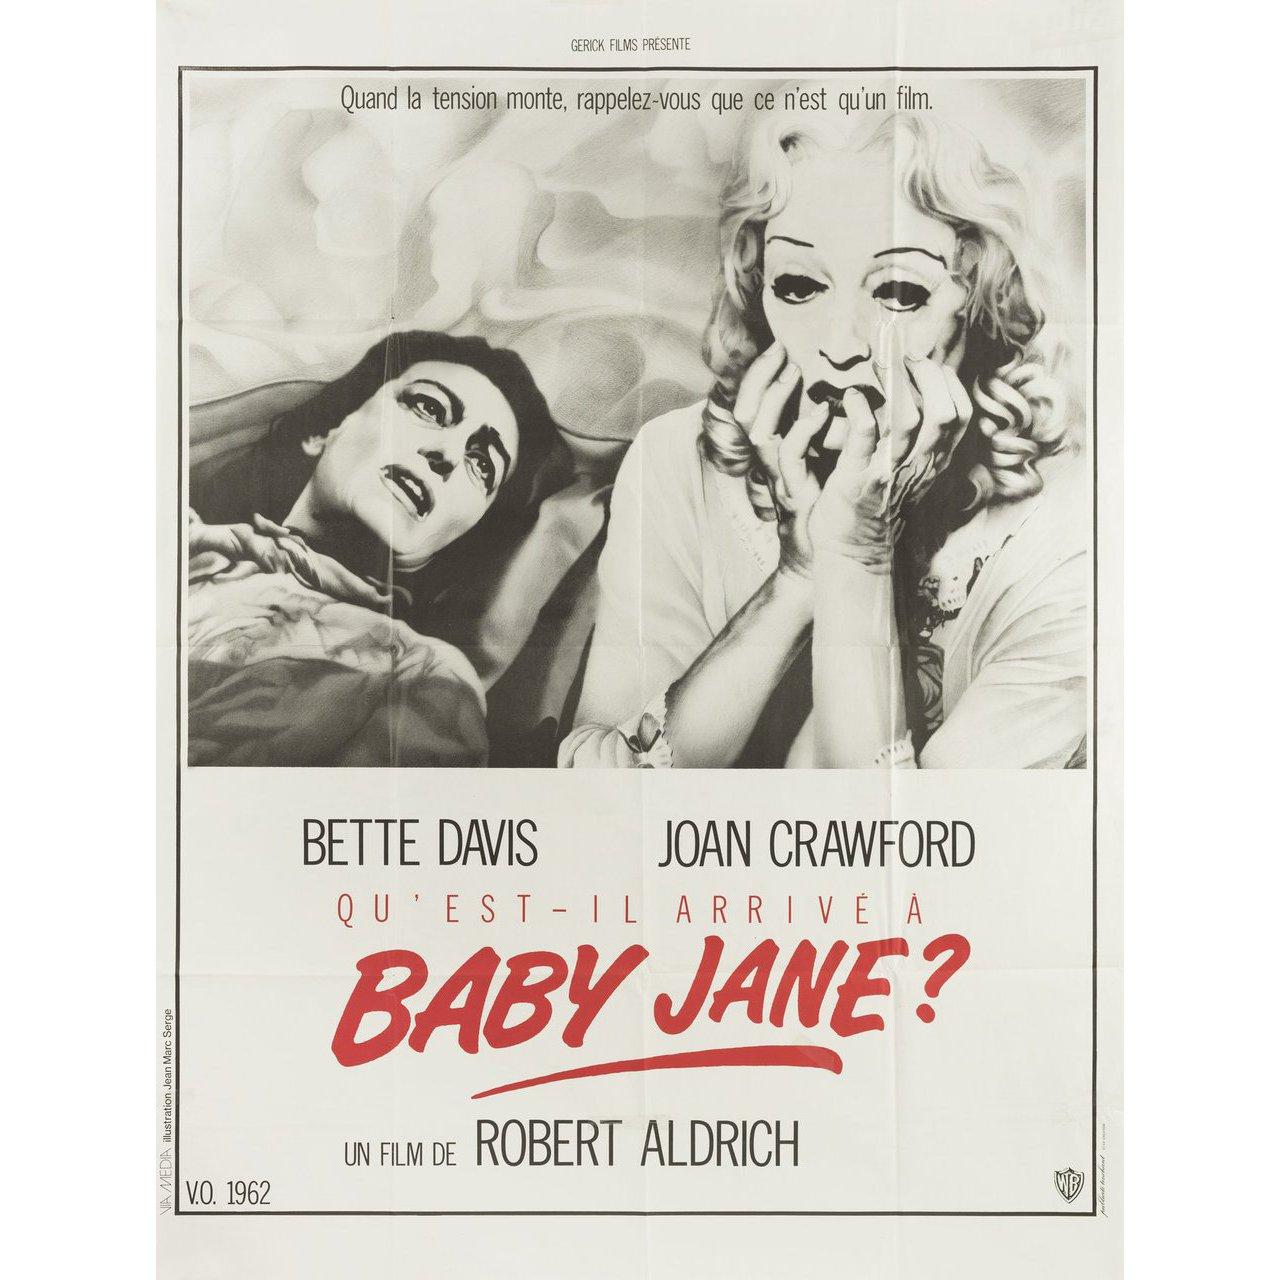 who directed what happened to baby jane